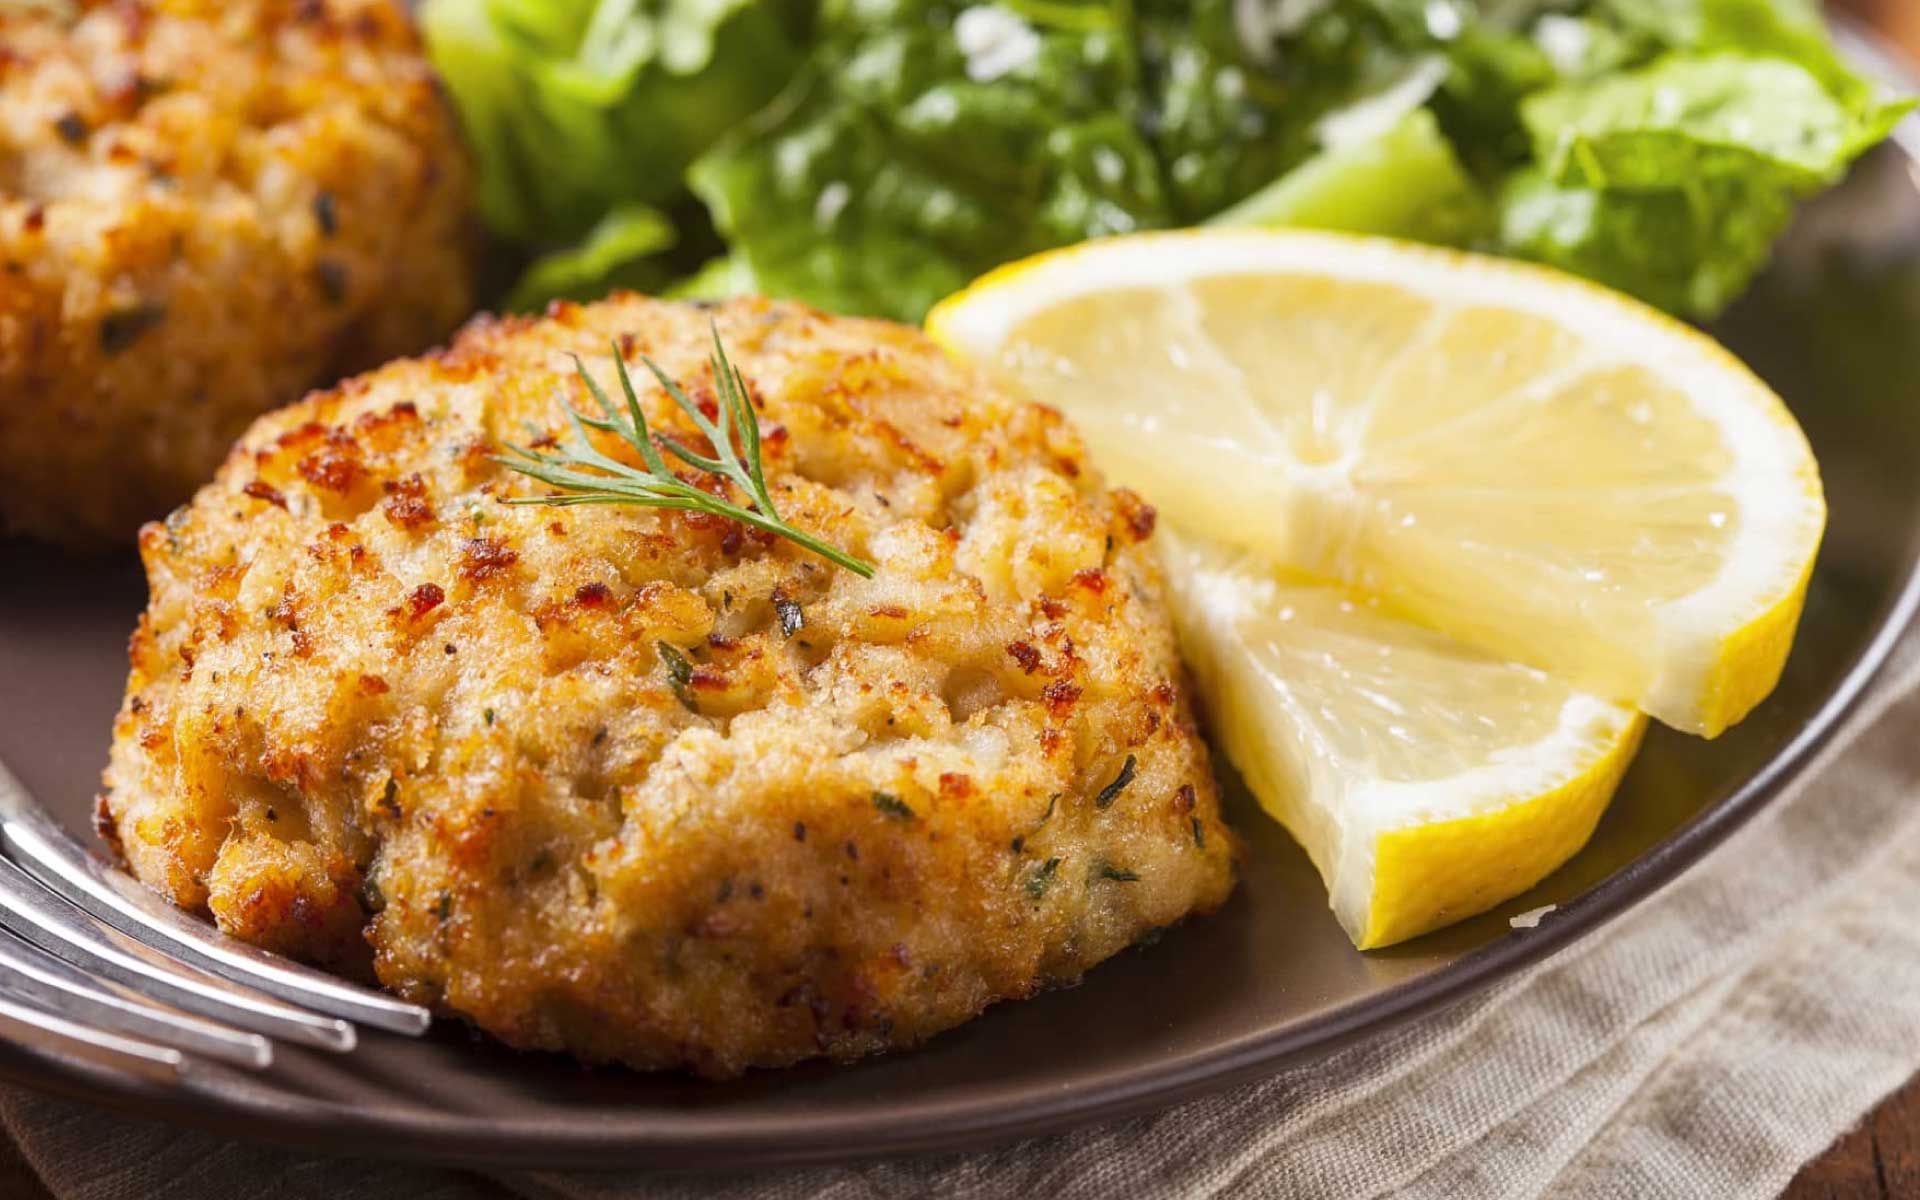 Nut and seed fish cakes